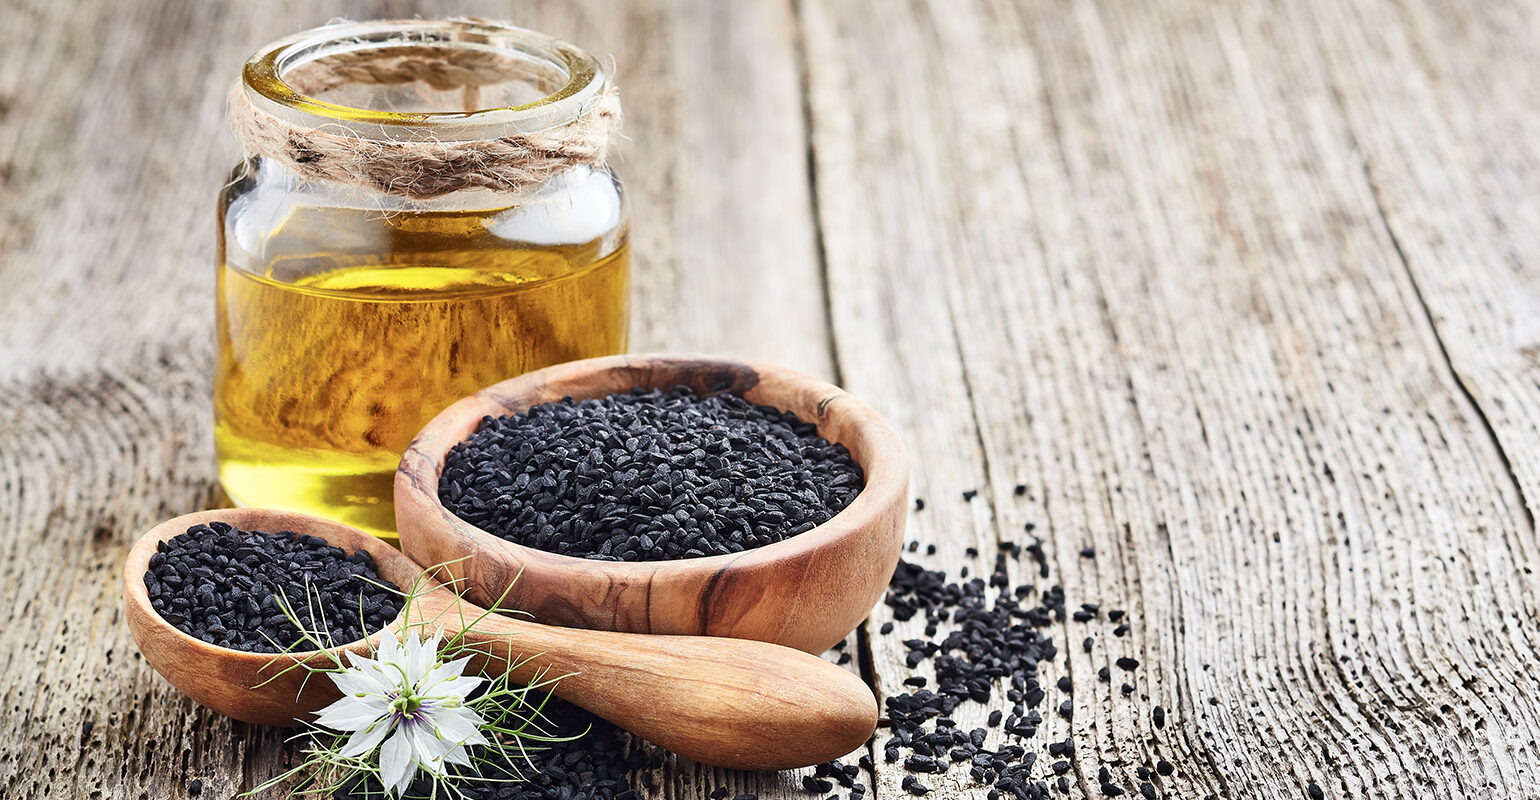 Is black seed oil good for losing weight?